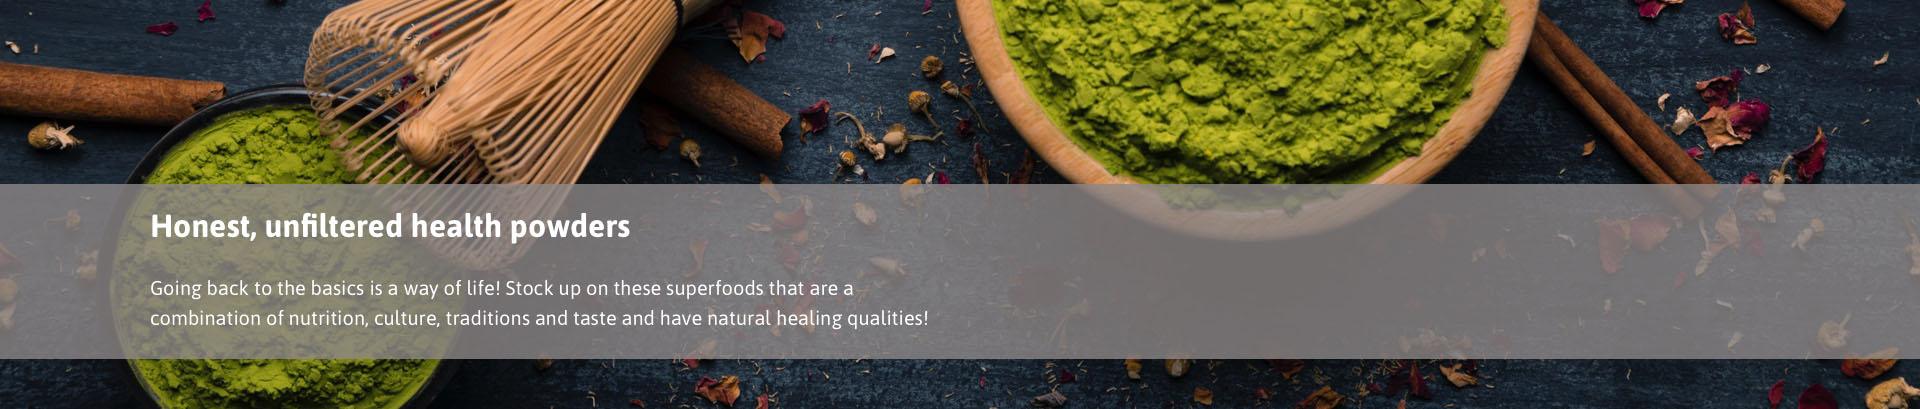 Food for thought - Health powders Banner